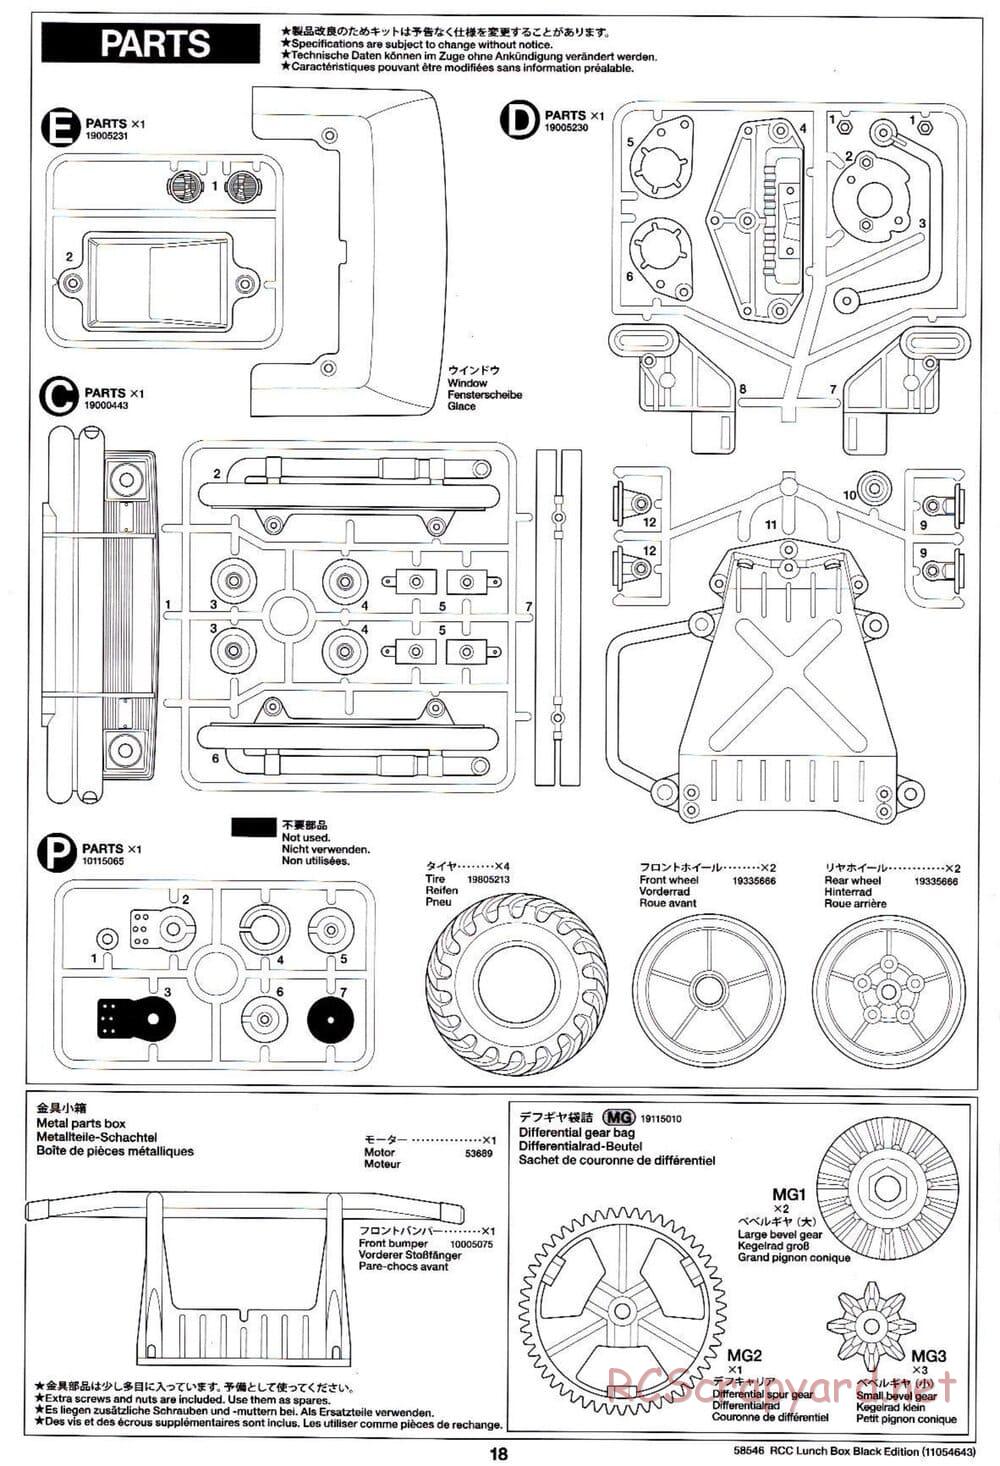 Tamiya - Lunch Box - Black Edition - CW-01 Chassis - Manual - Page 18